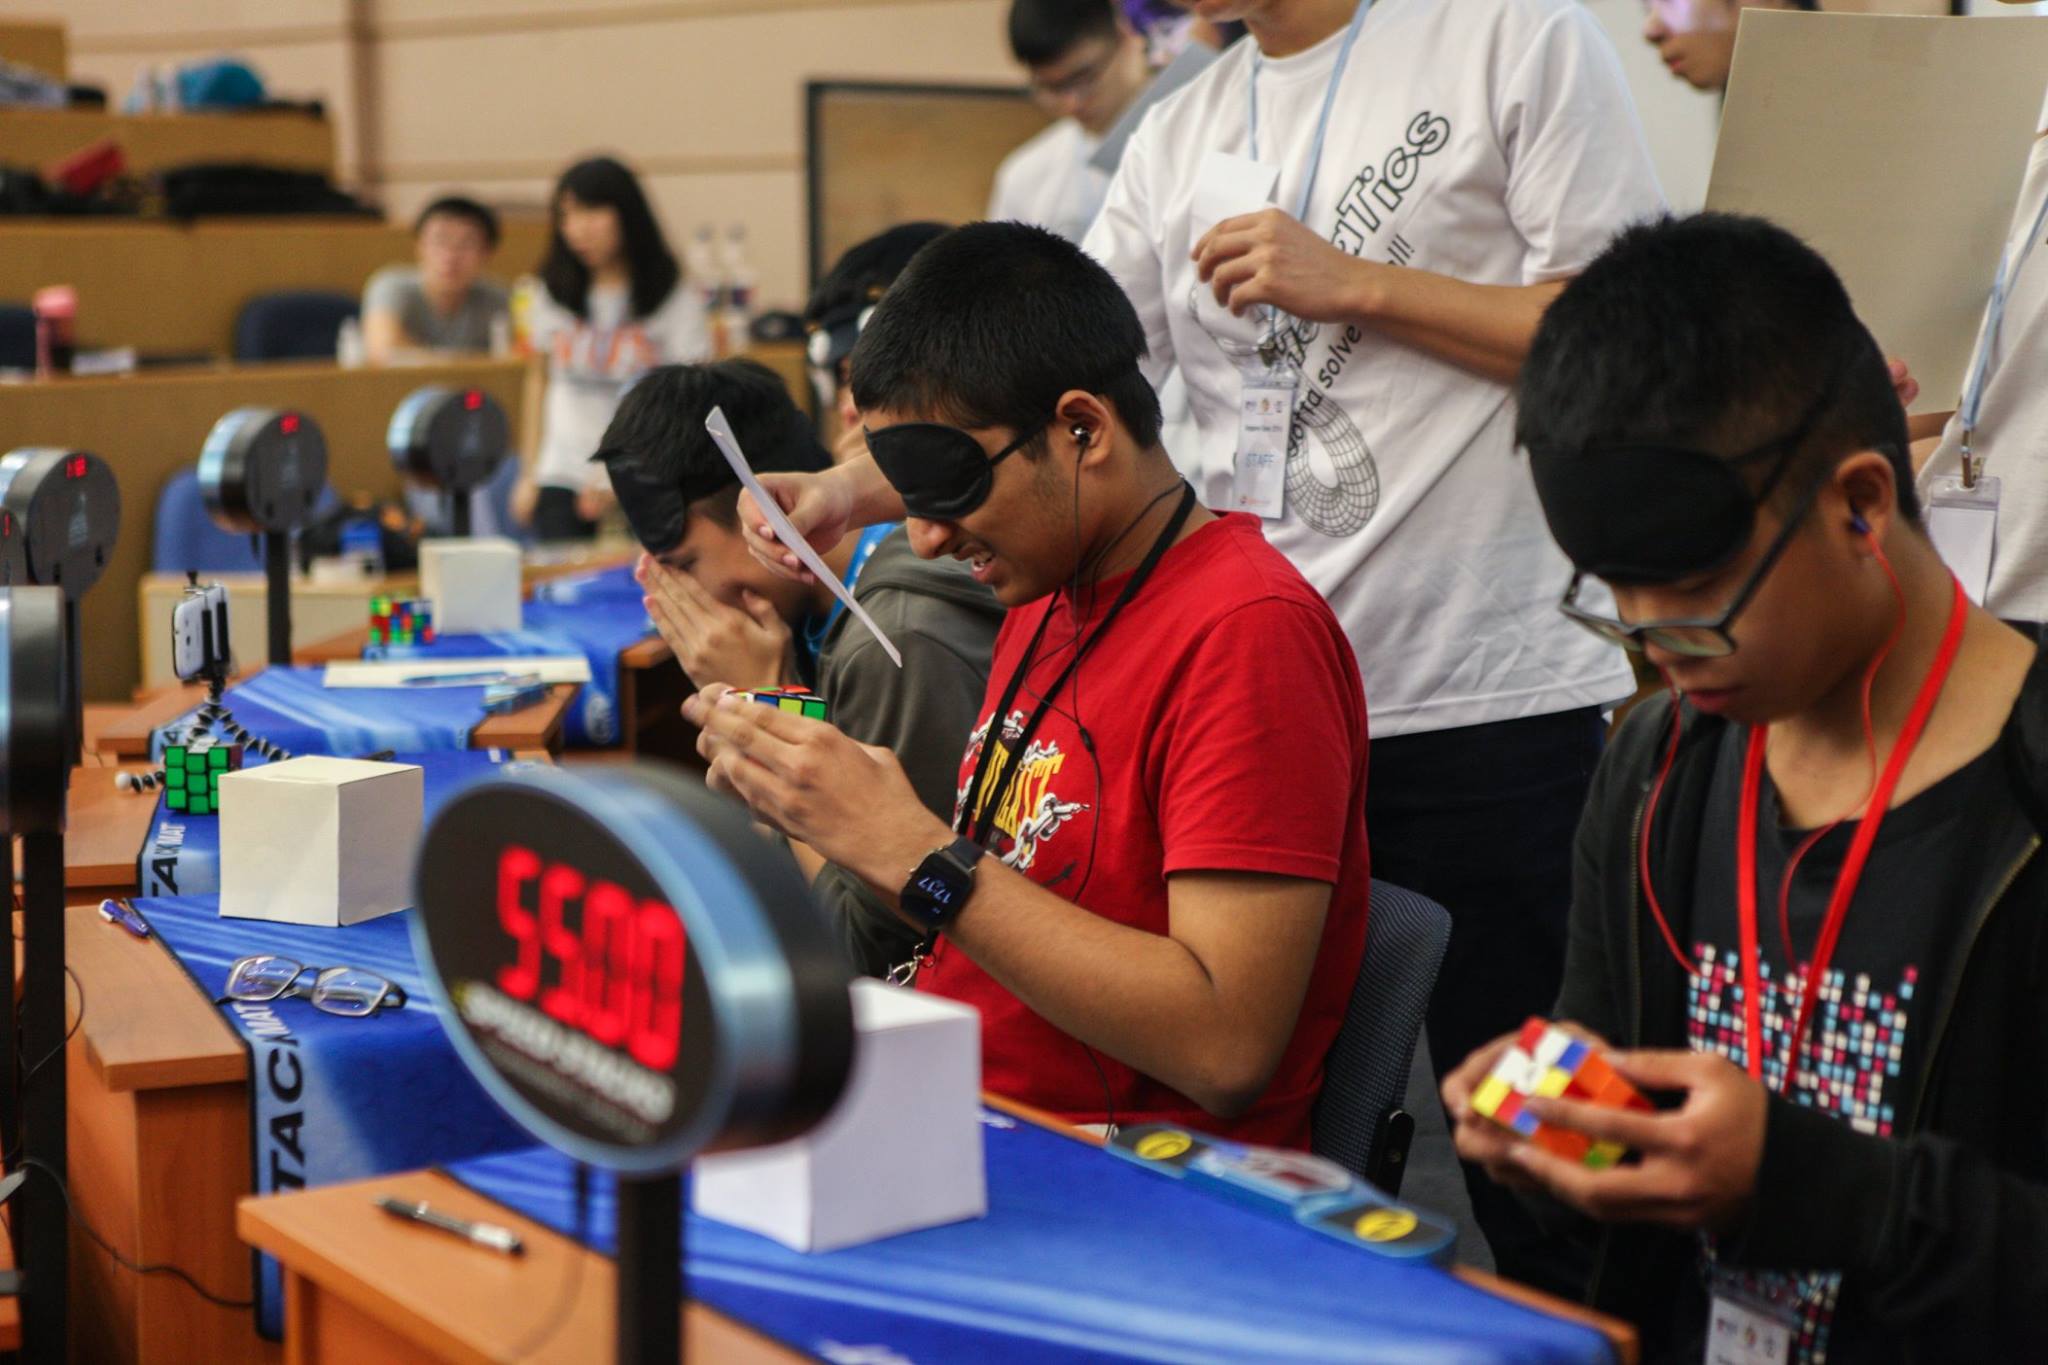 Several cubers competing in Rubik's Cube Competition